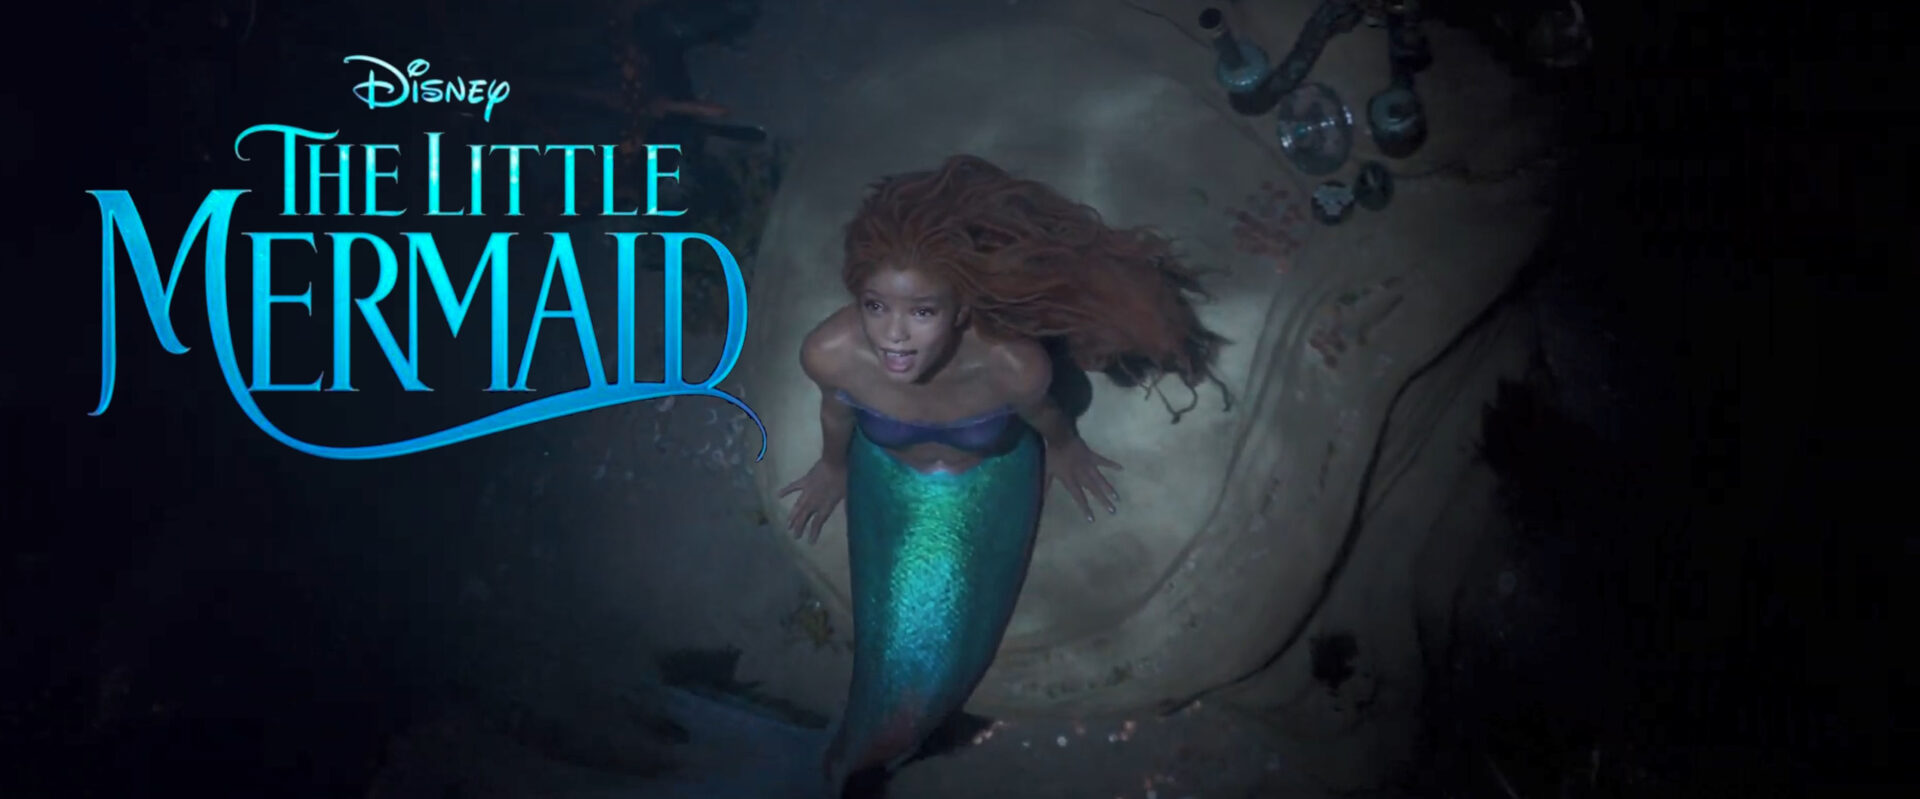 TRAILER Ariel Dreams About The Surface World in 'The Little Mermaid